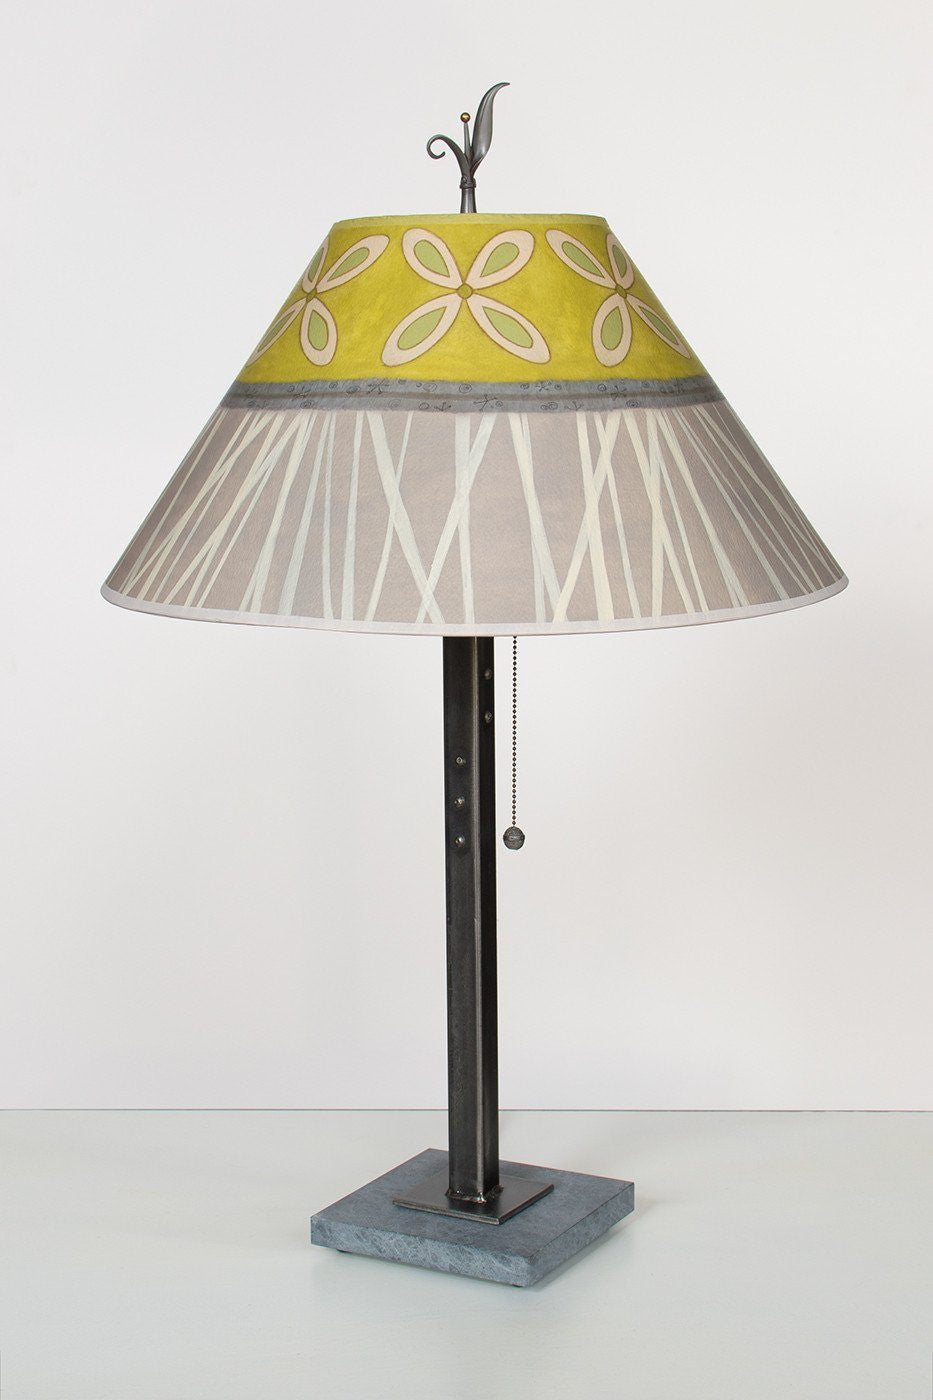 Janna Ugone &amp; Co Table Lamps Steel Table Lamp with Large Conical Shade in Kiwi